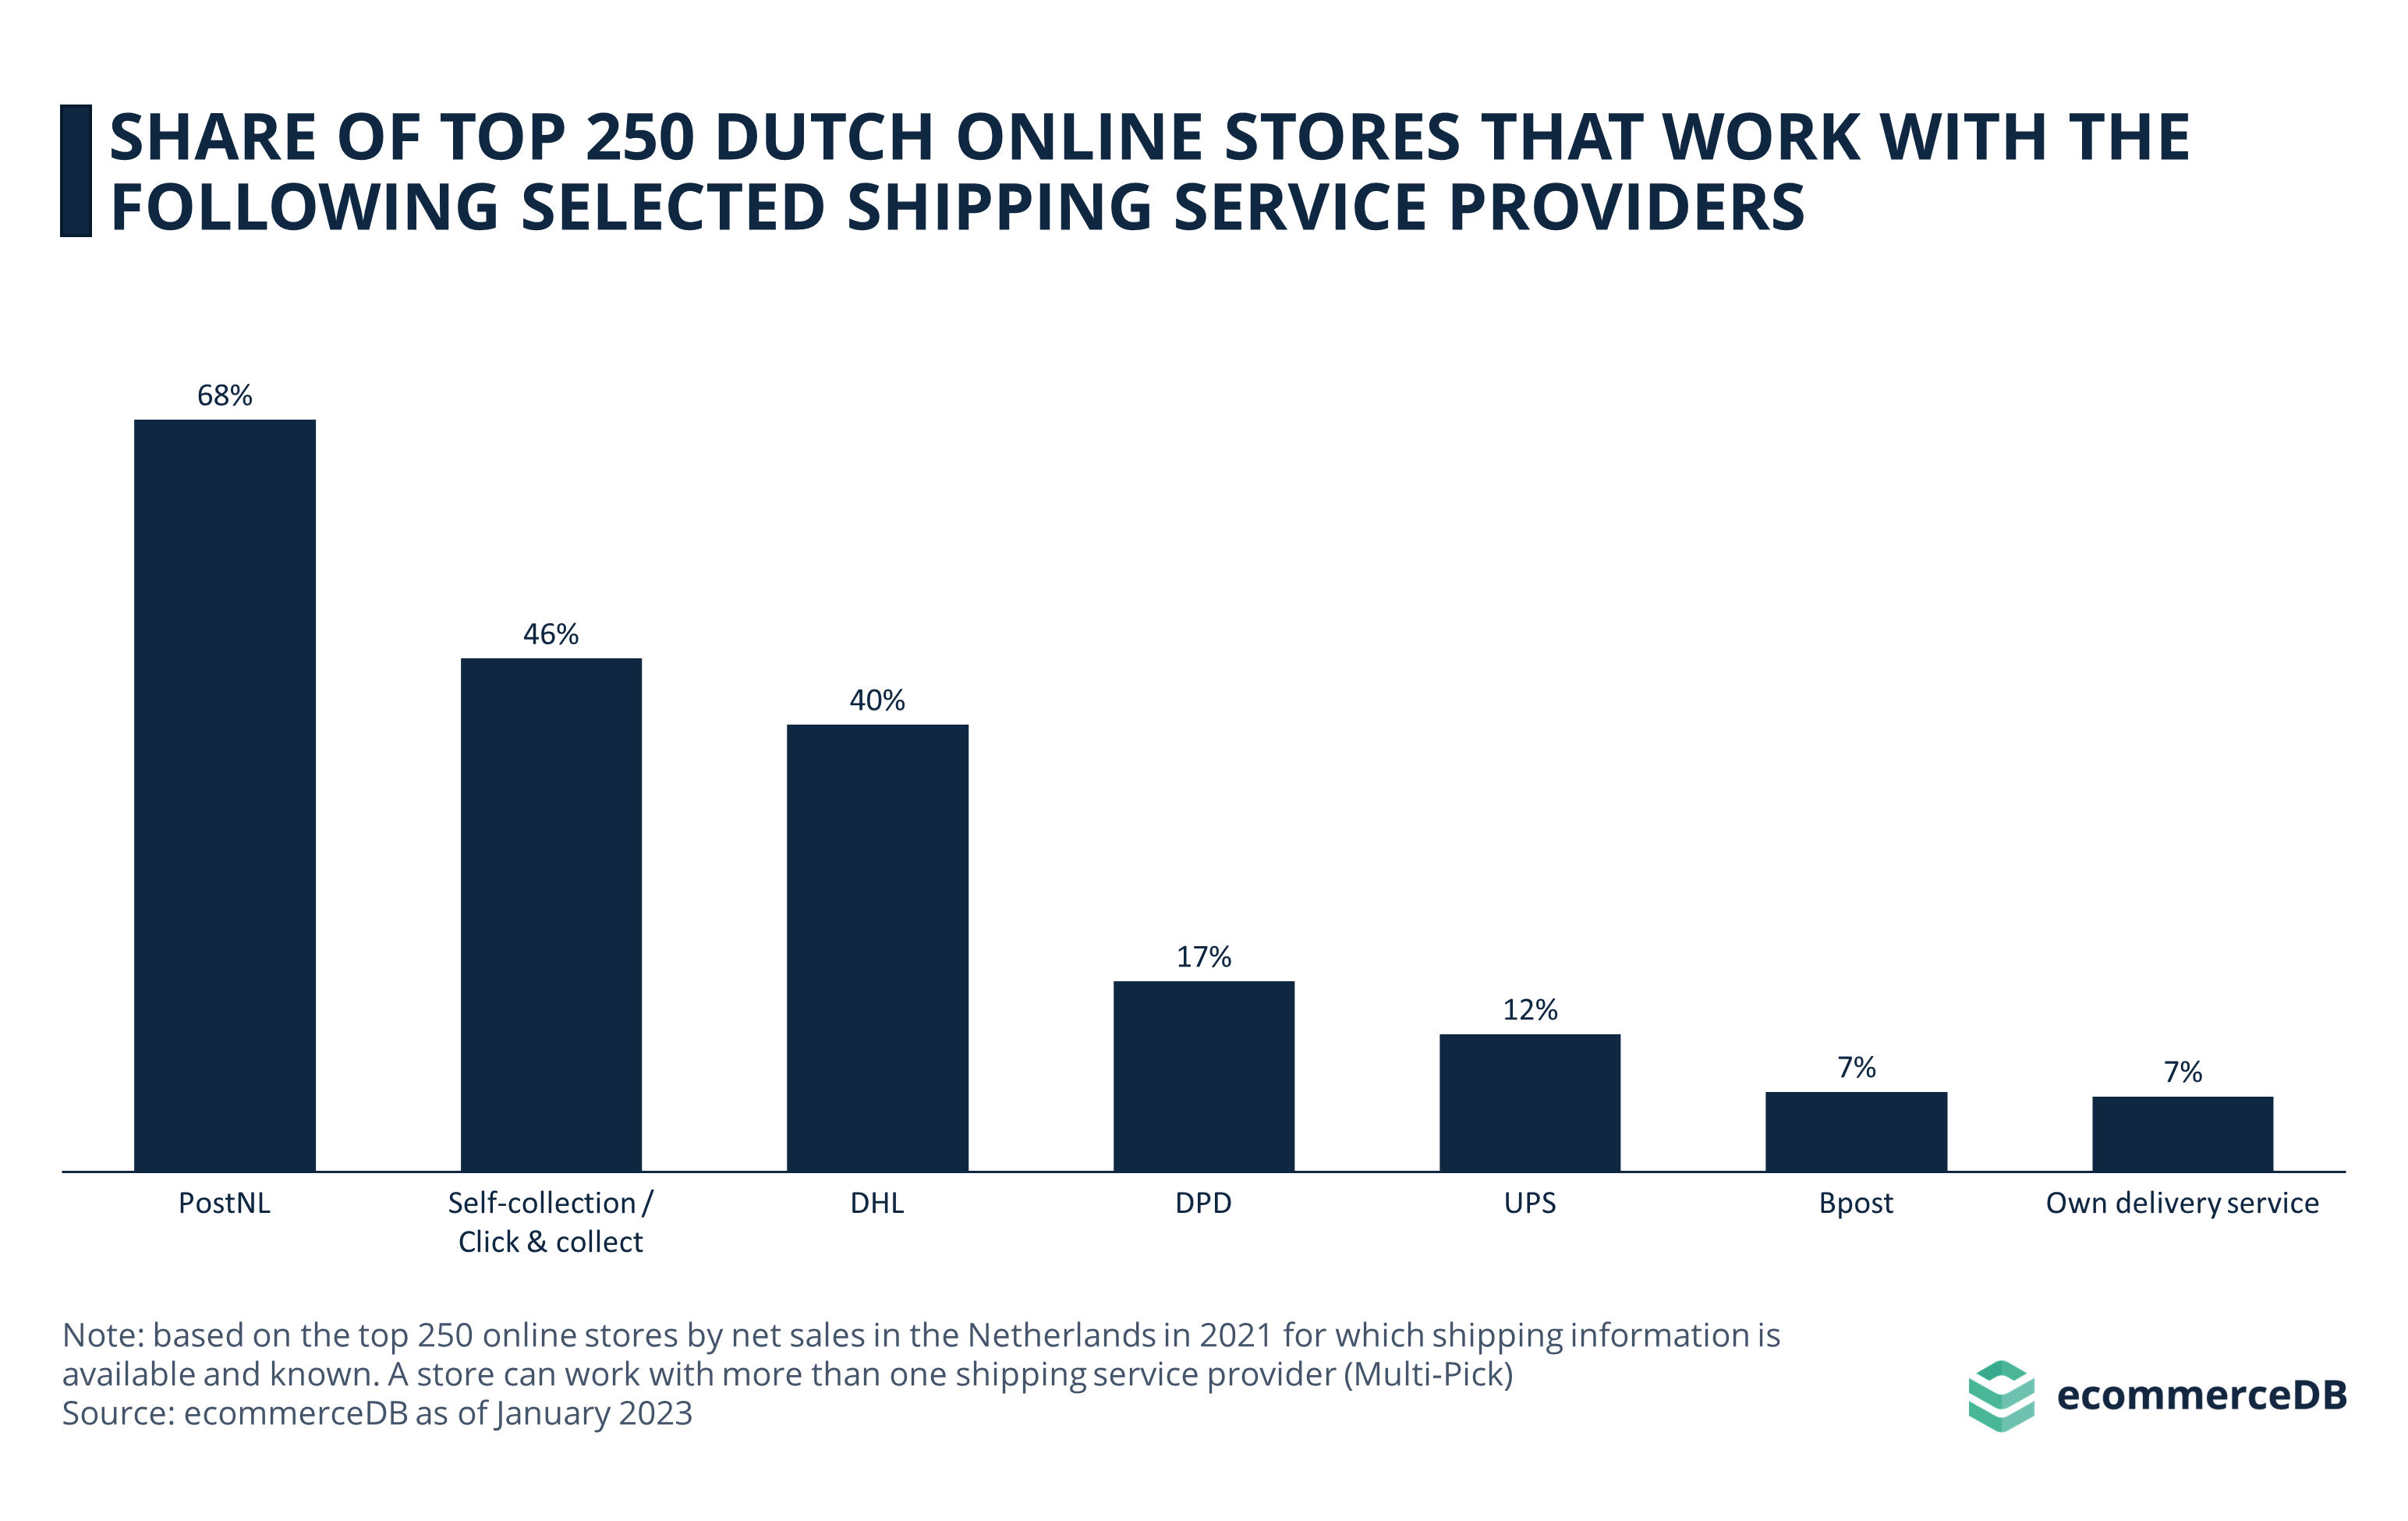 Share of Top 250 Dutch Online Stores That Work With the Following Selected Shipping Service Providers